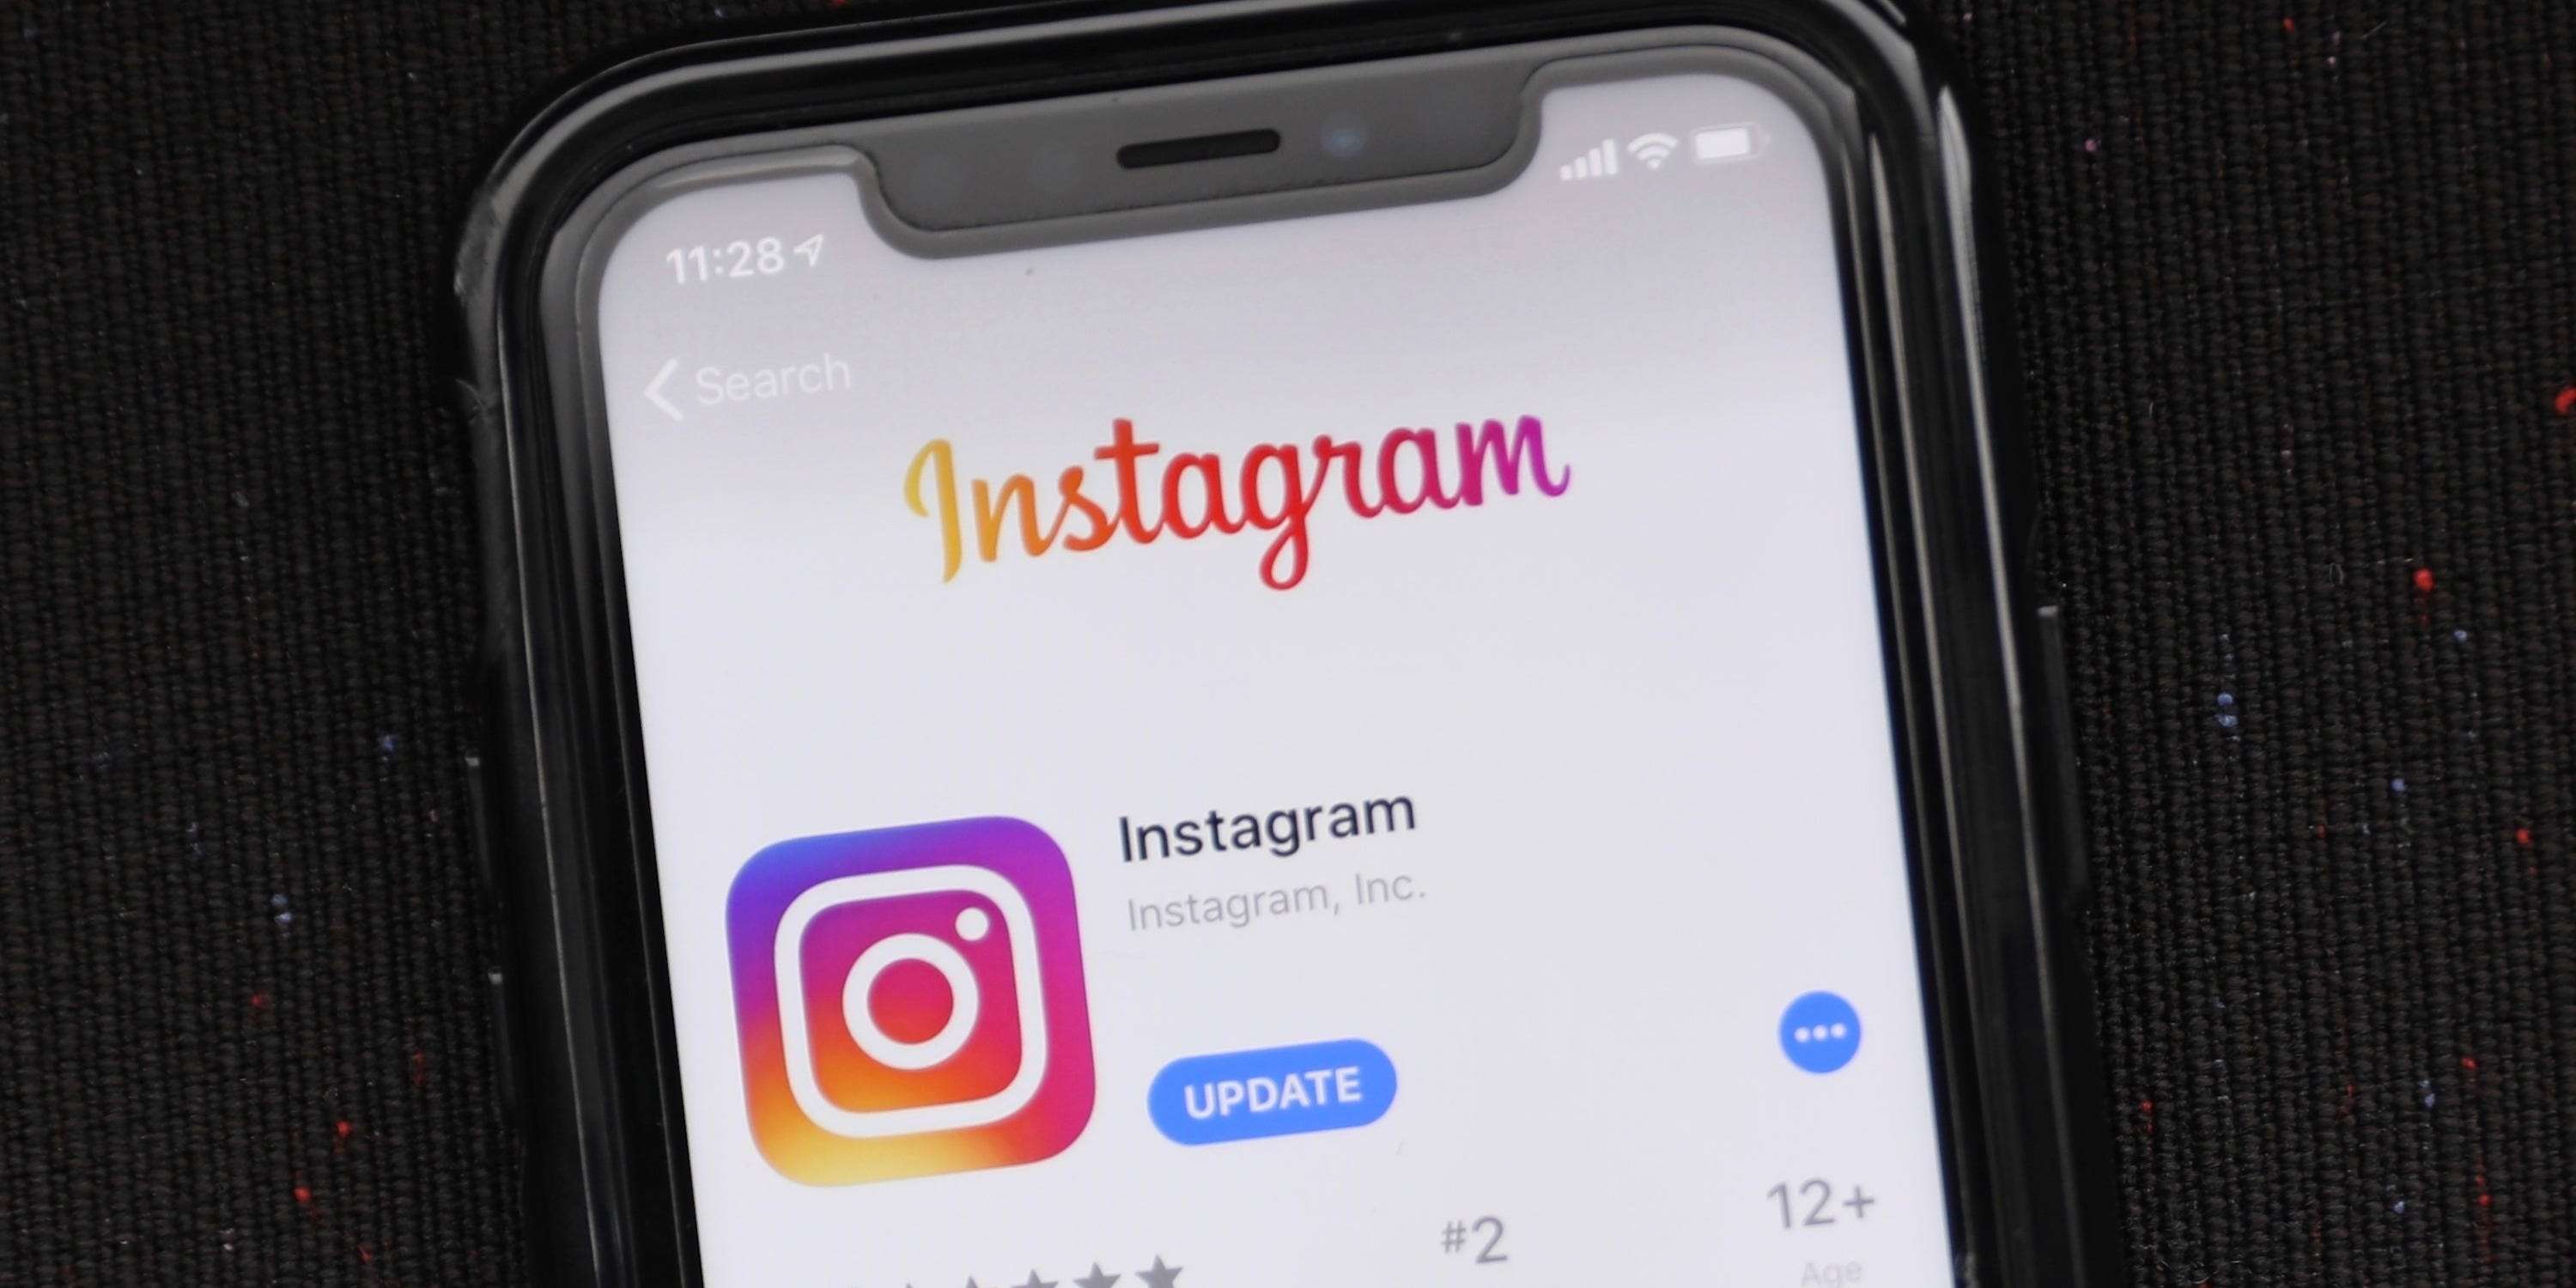 How to find your contacts on Instagram and then follow them using the